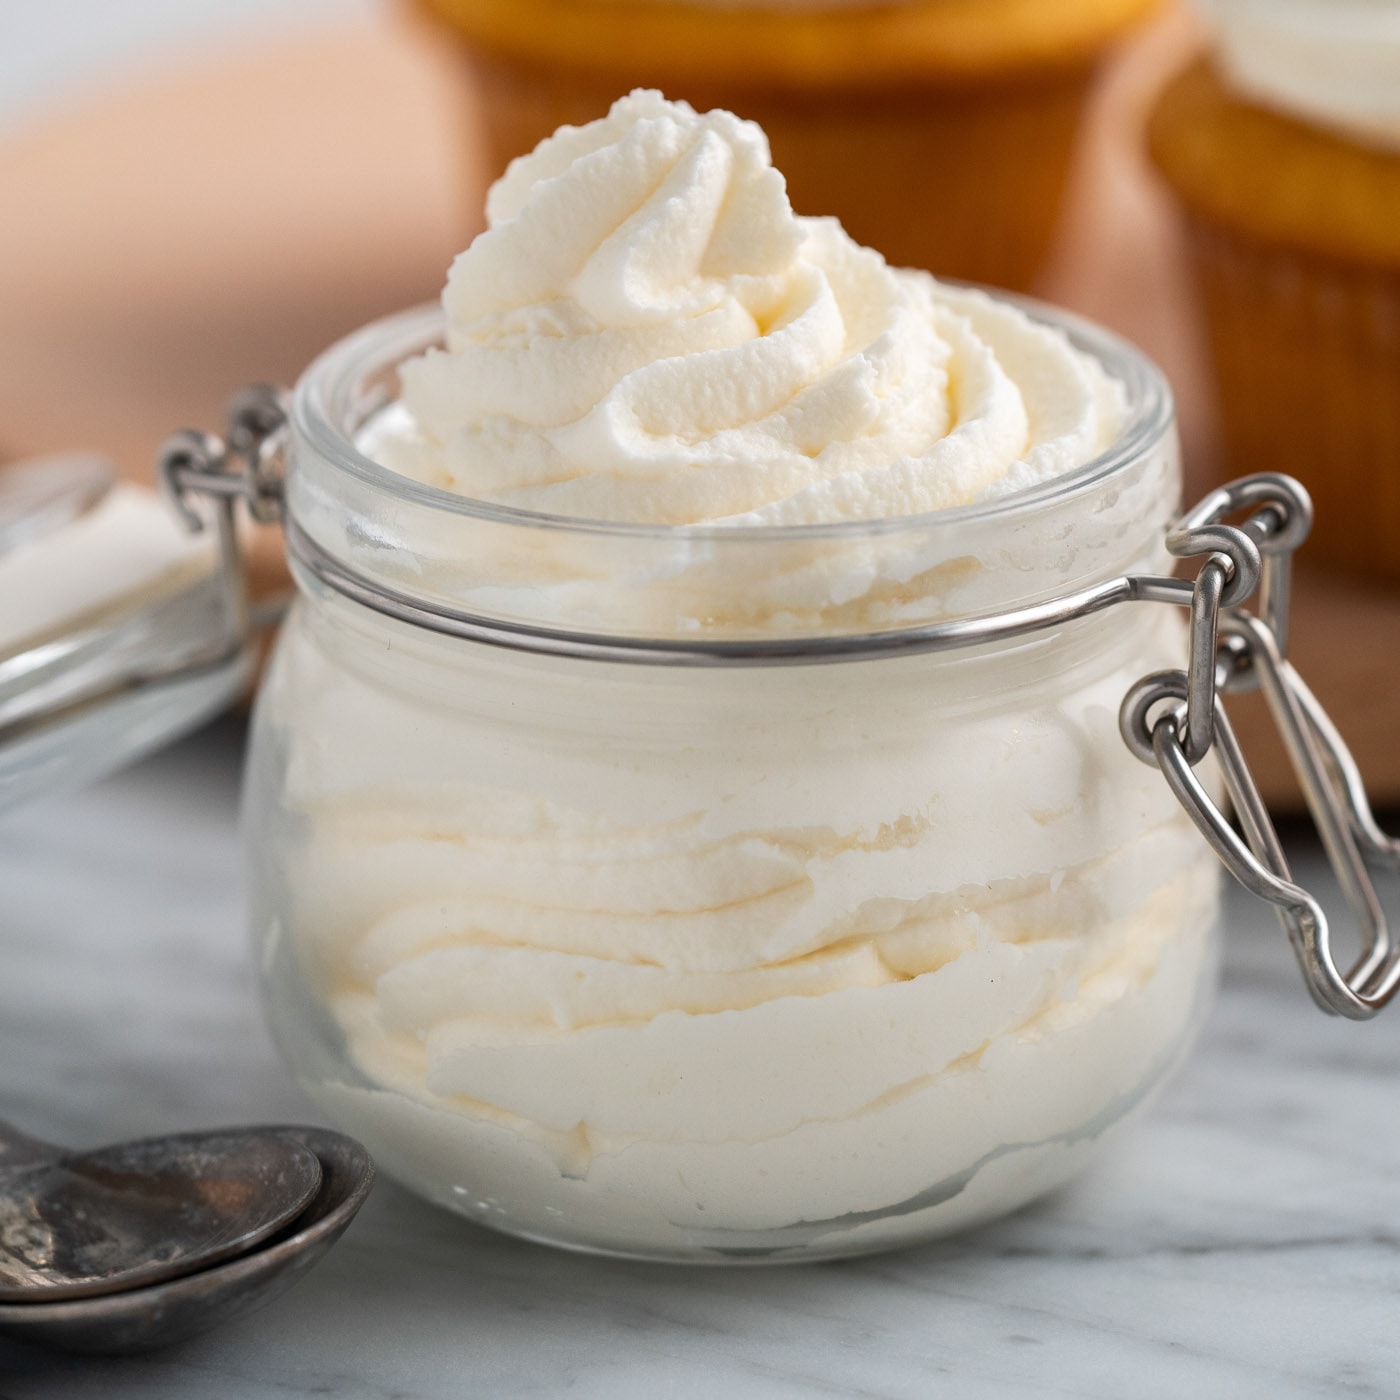 How to stabilize whipped cream - The Washington Post